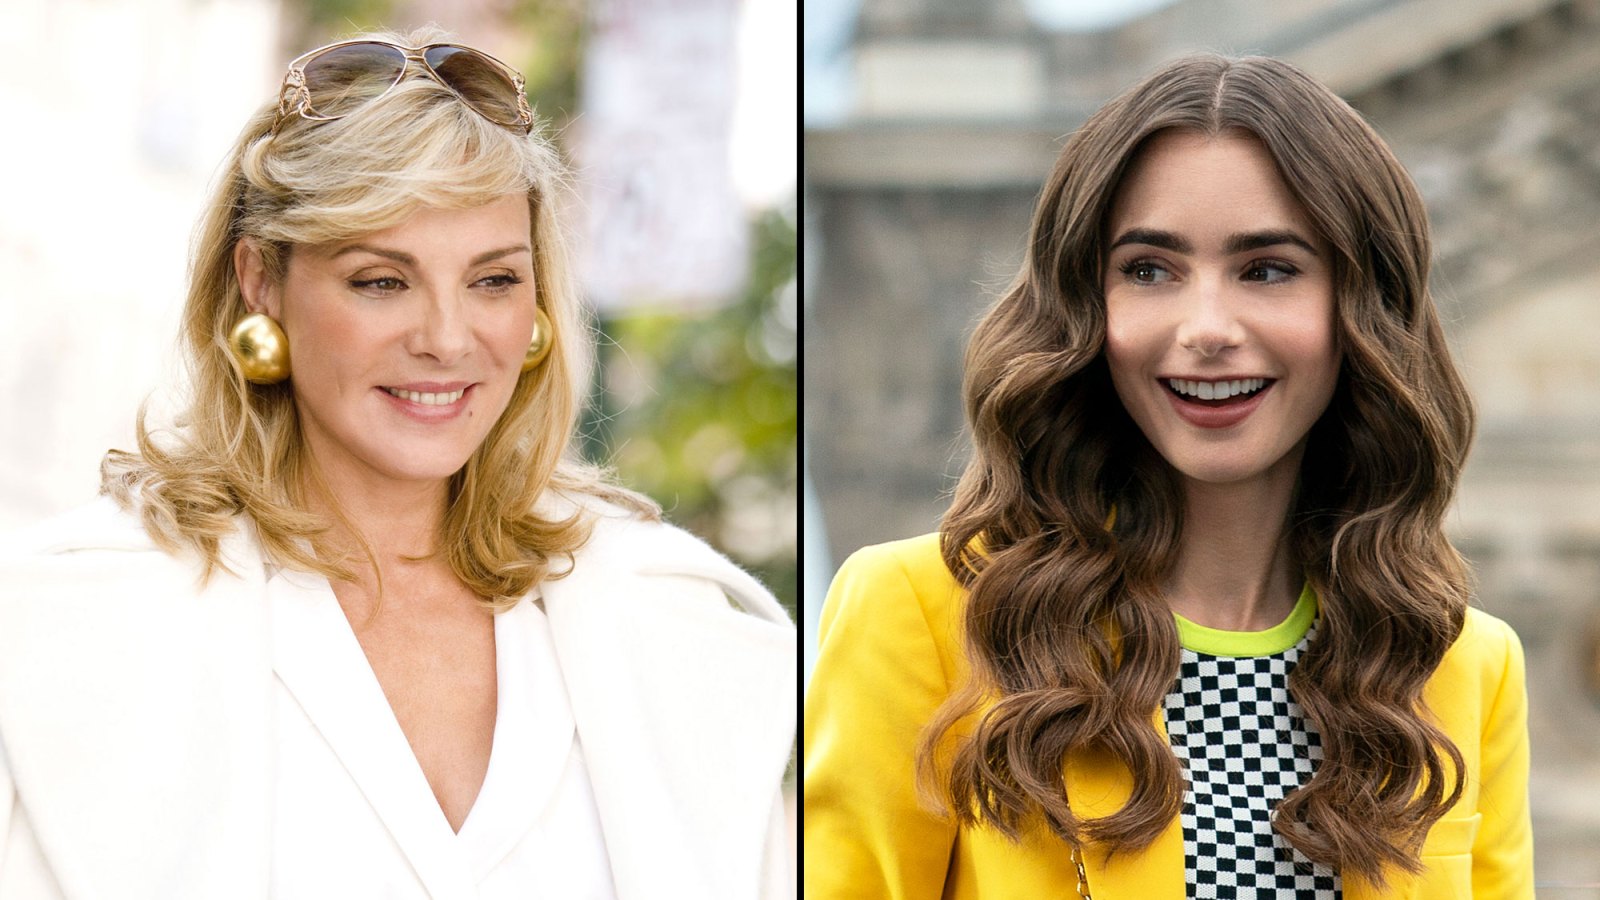 Why Fans Think Sex and the City's Samantha Jones Will Make a Cameo on Emily in Paris